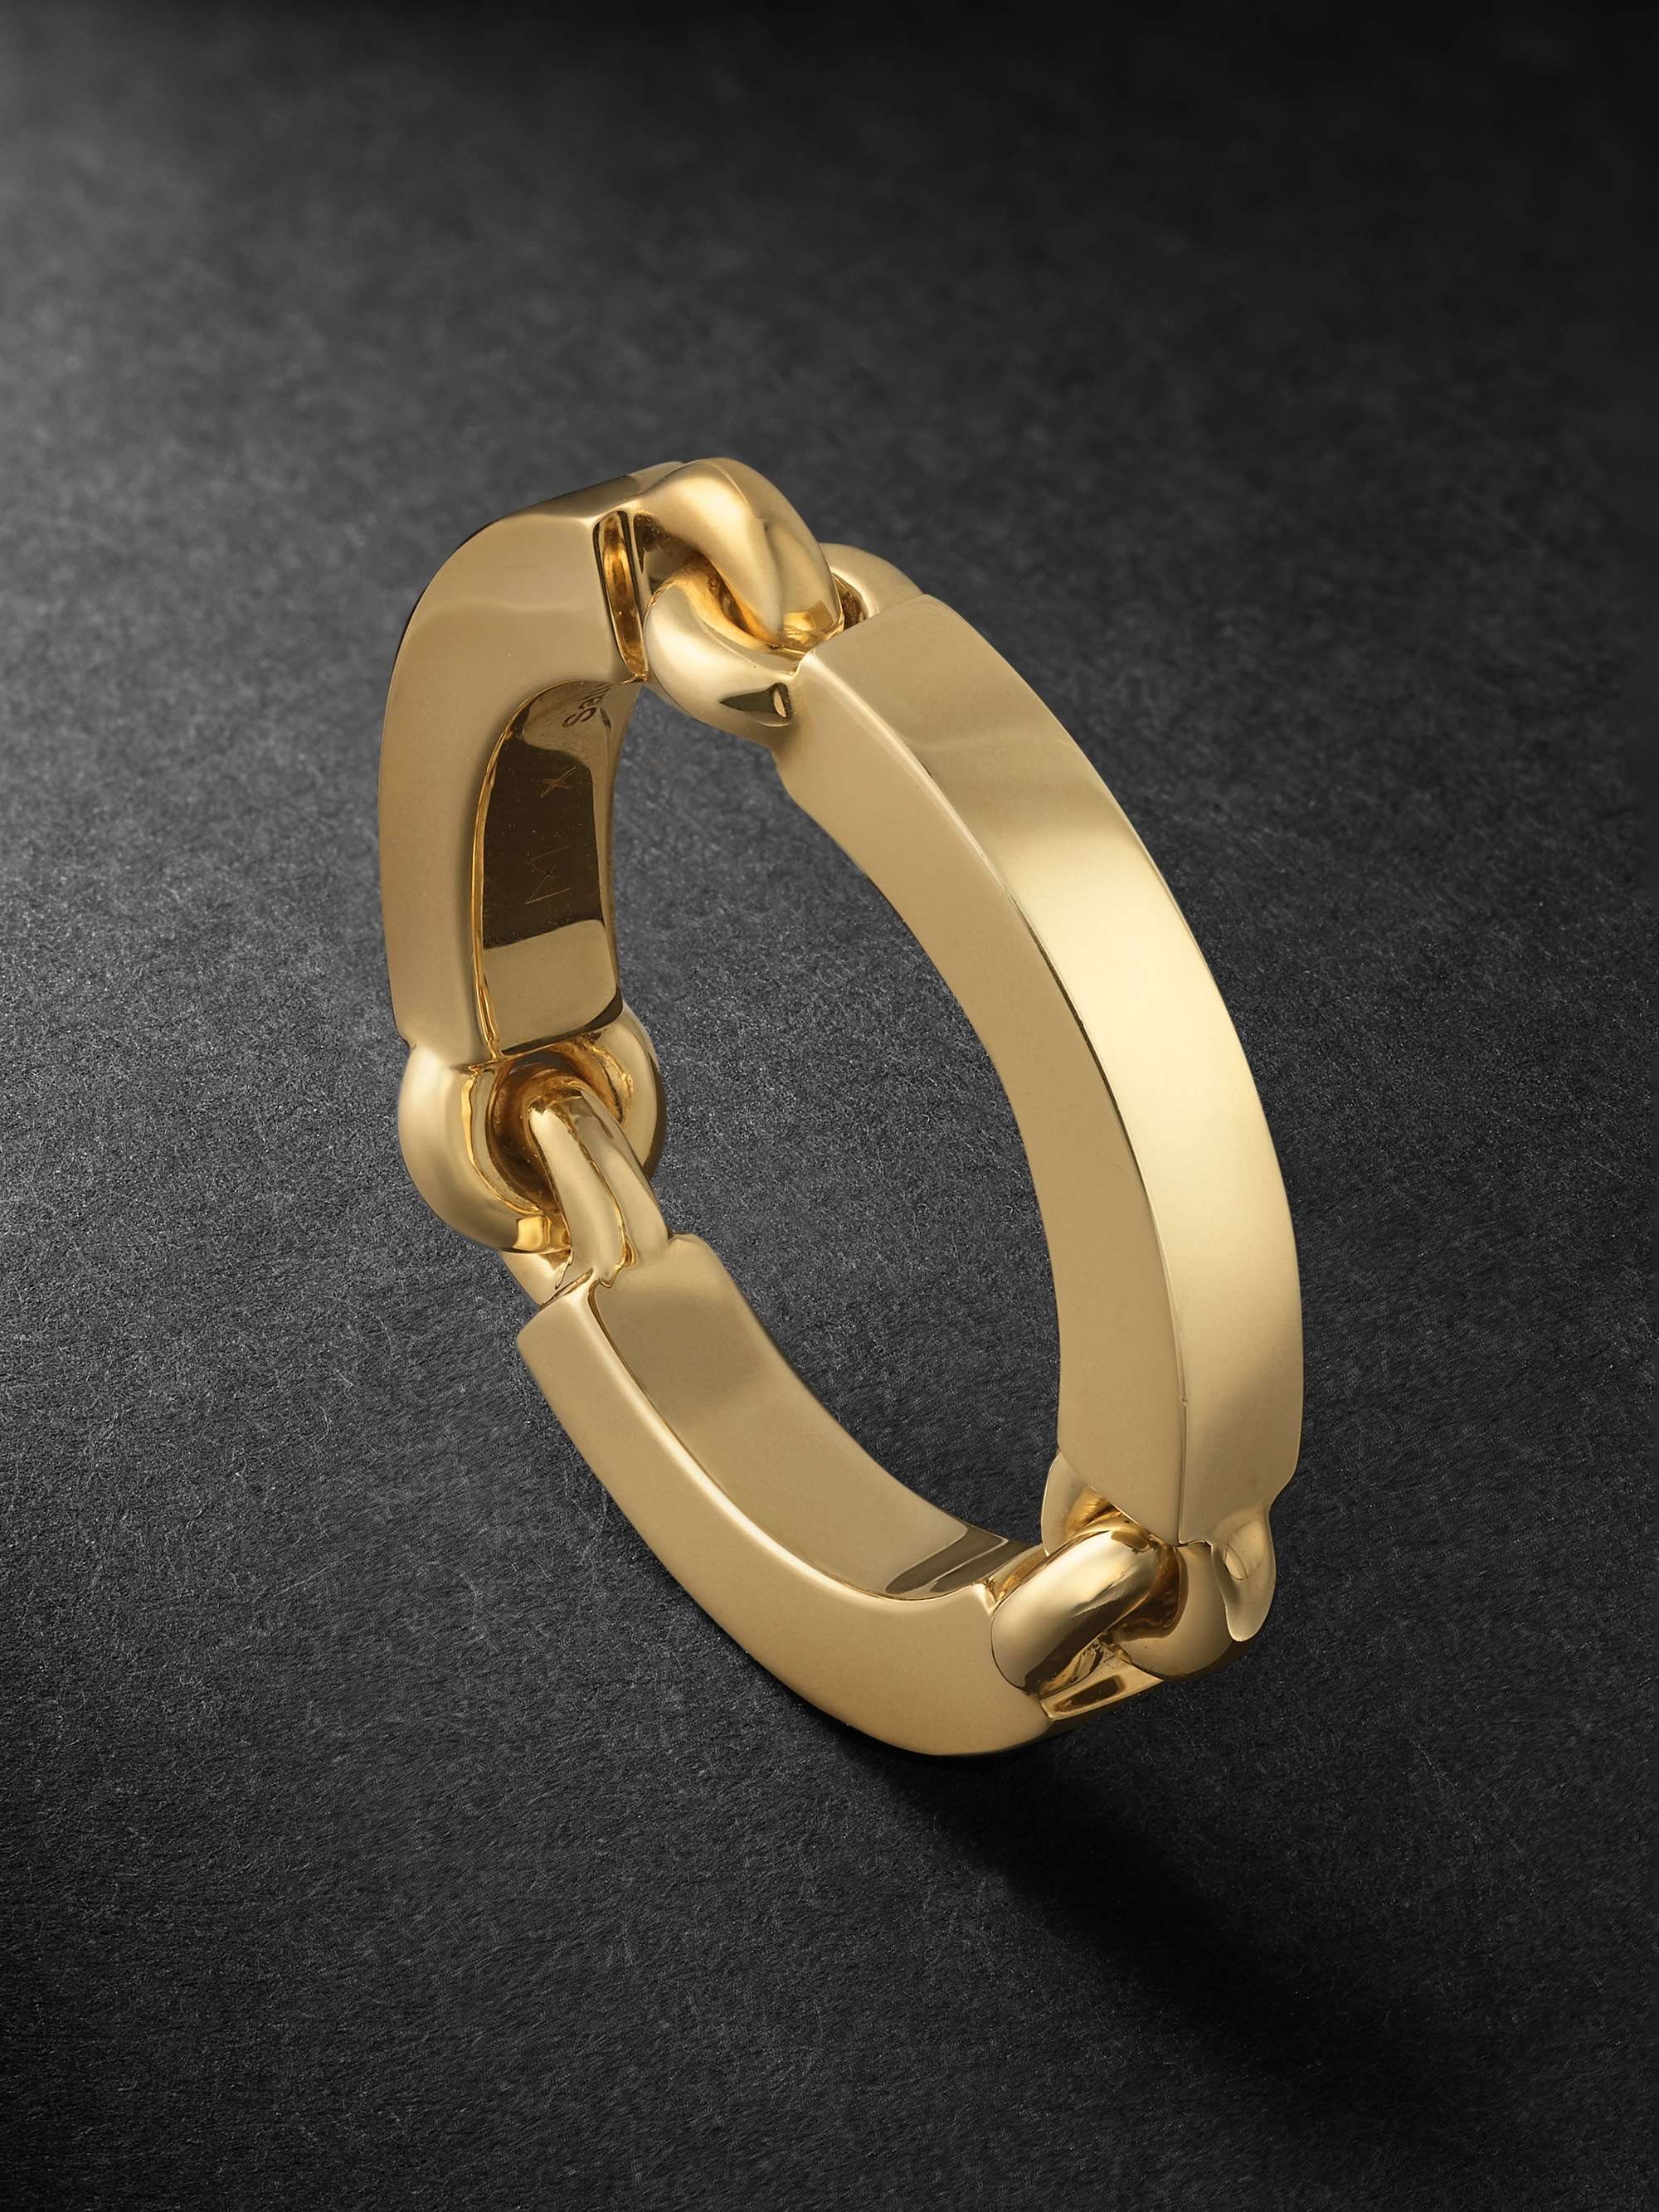 MAOR The Perihelion White, Yellow and Rose Gold Ring